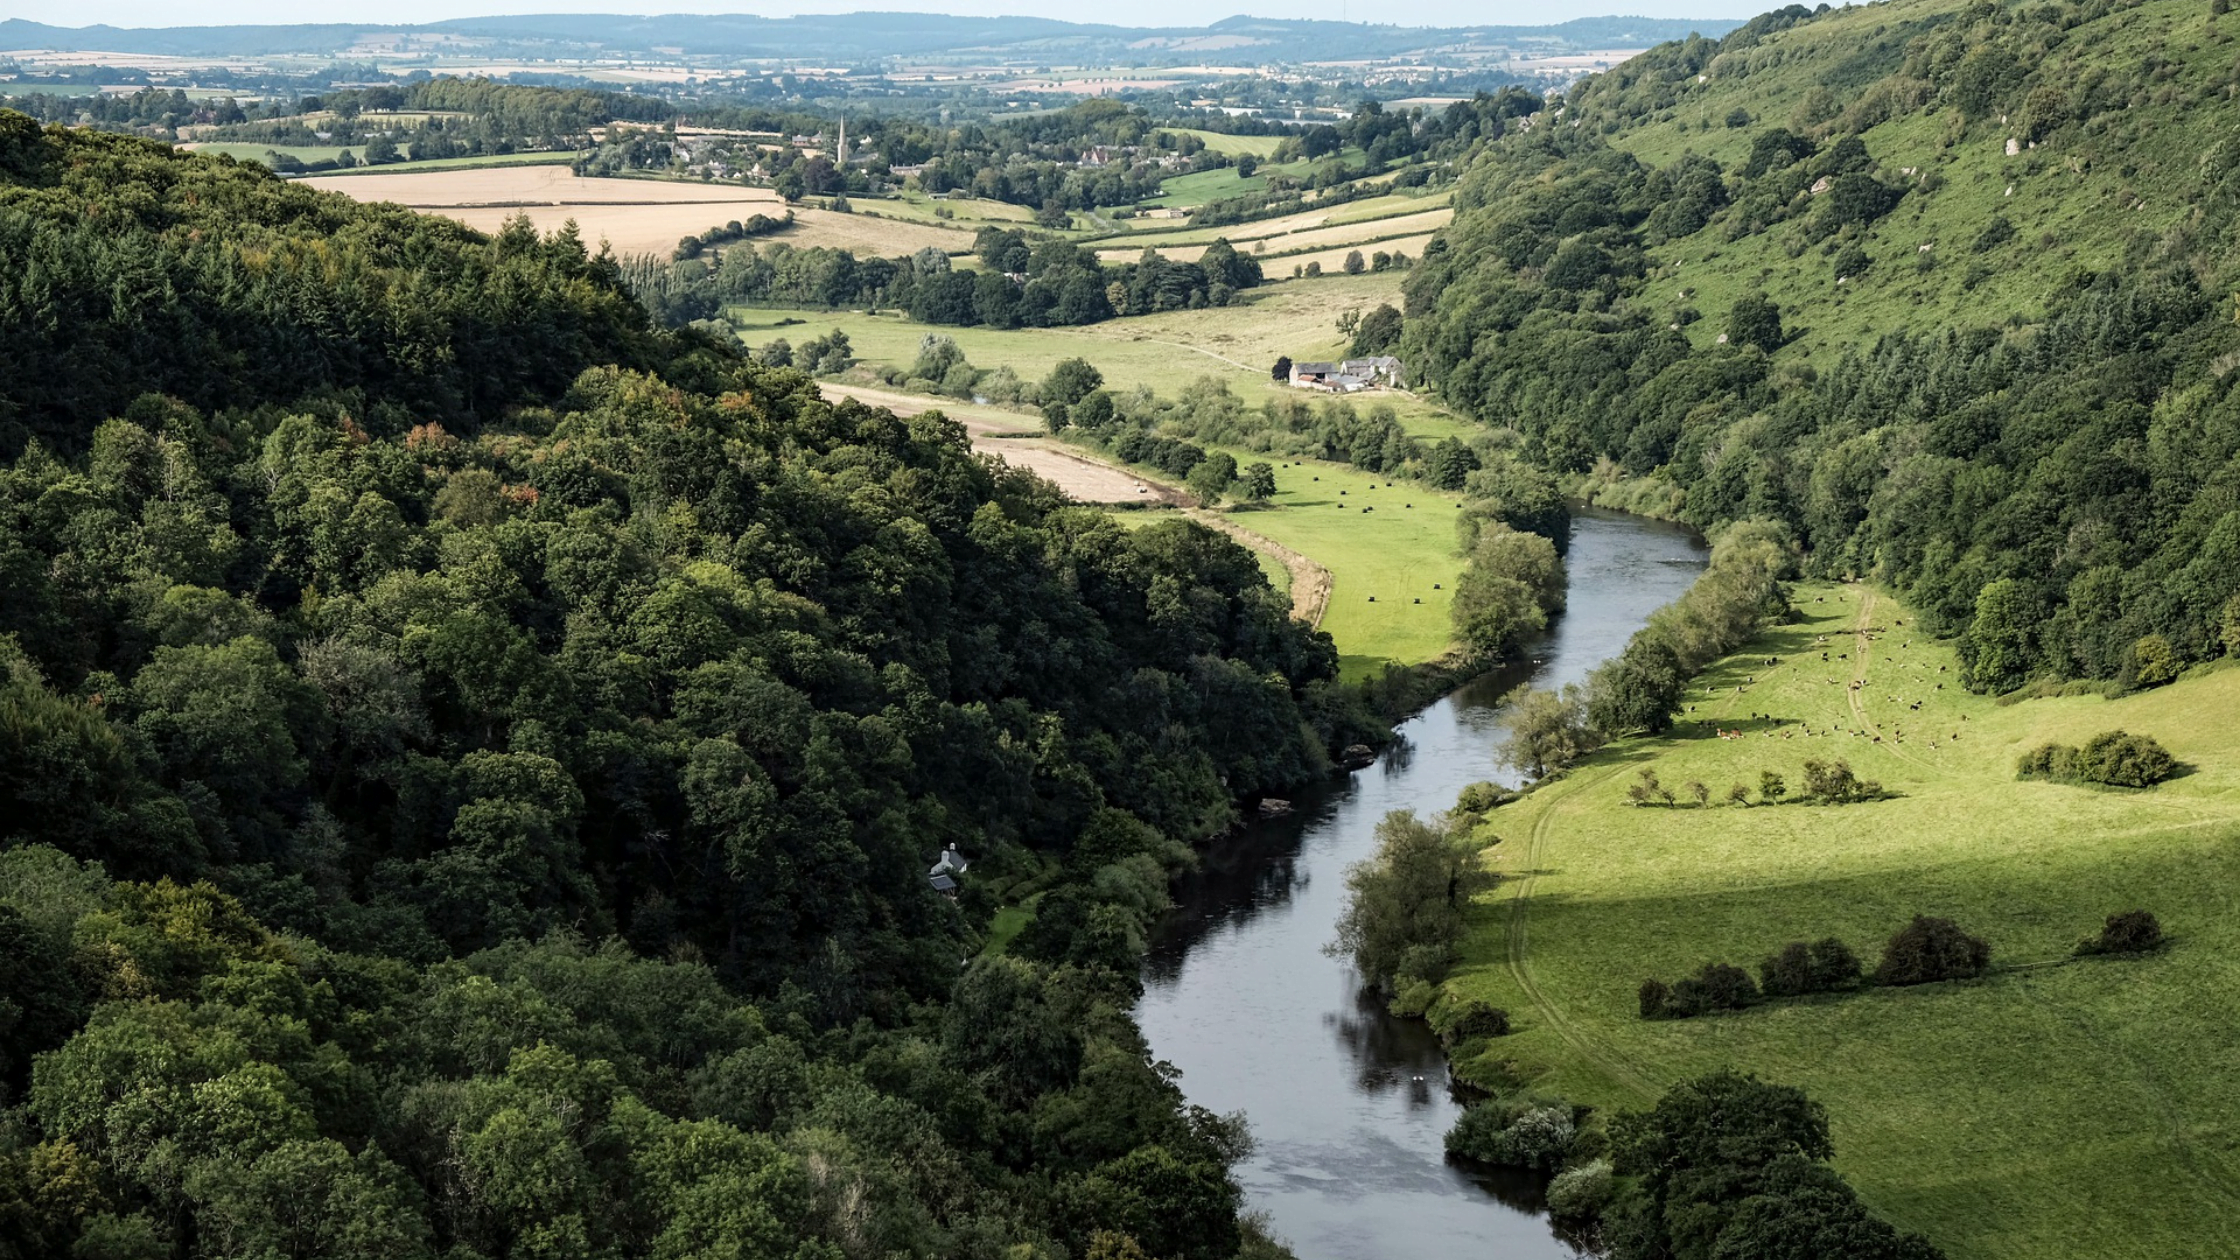 The River Wye that's suffering from waste dumping